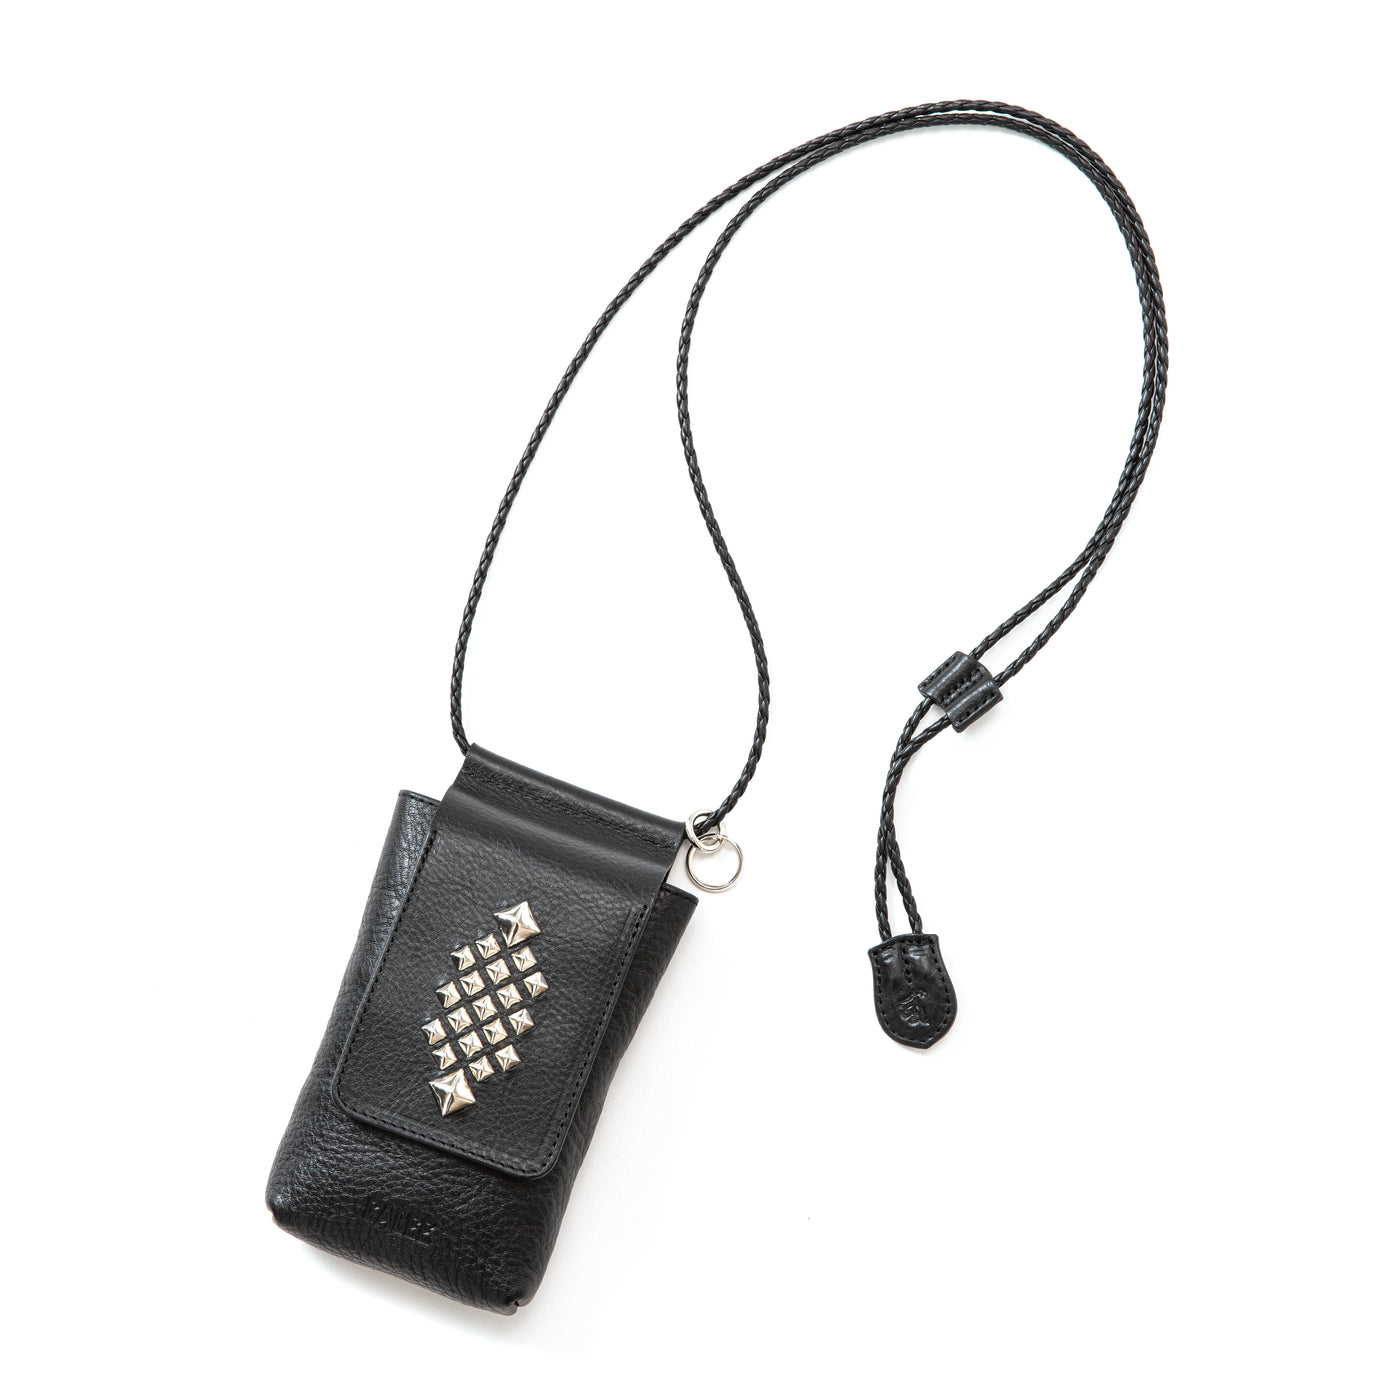 STUDS LEATHER SMART PHONE SHOULDER POUCH